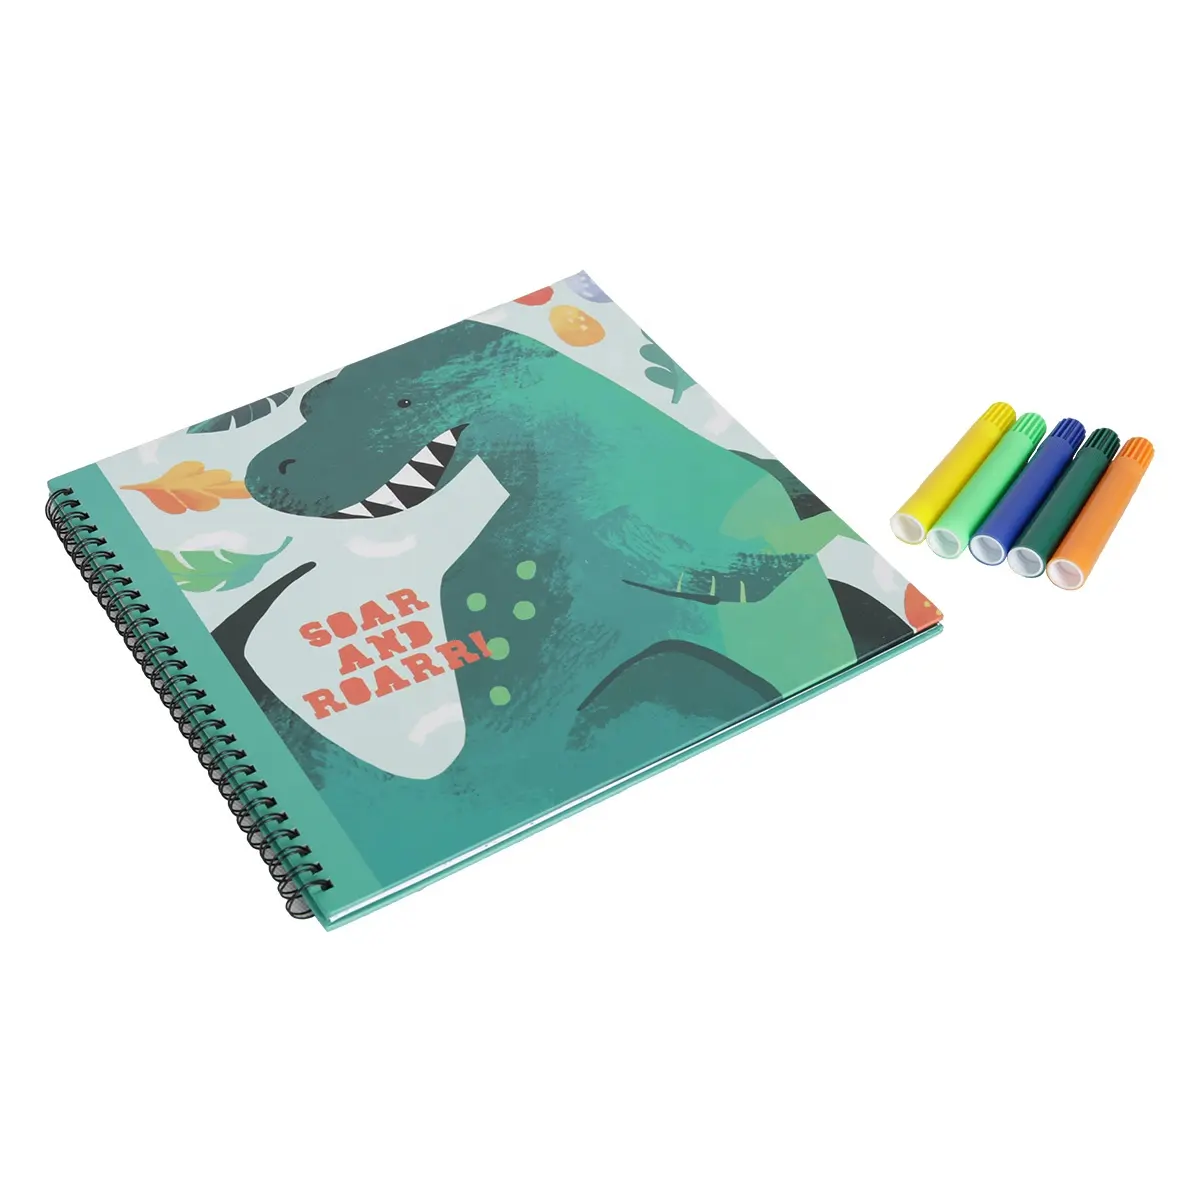 Dinosaur Storybooks for Children Customized Creative Draw Build Your Own Dinosaur Storybook Professional Children Coloring Book